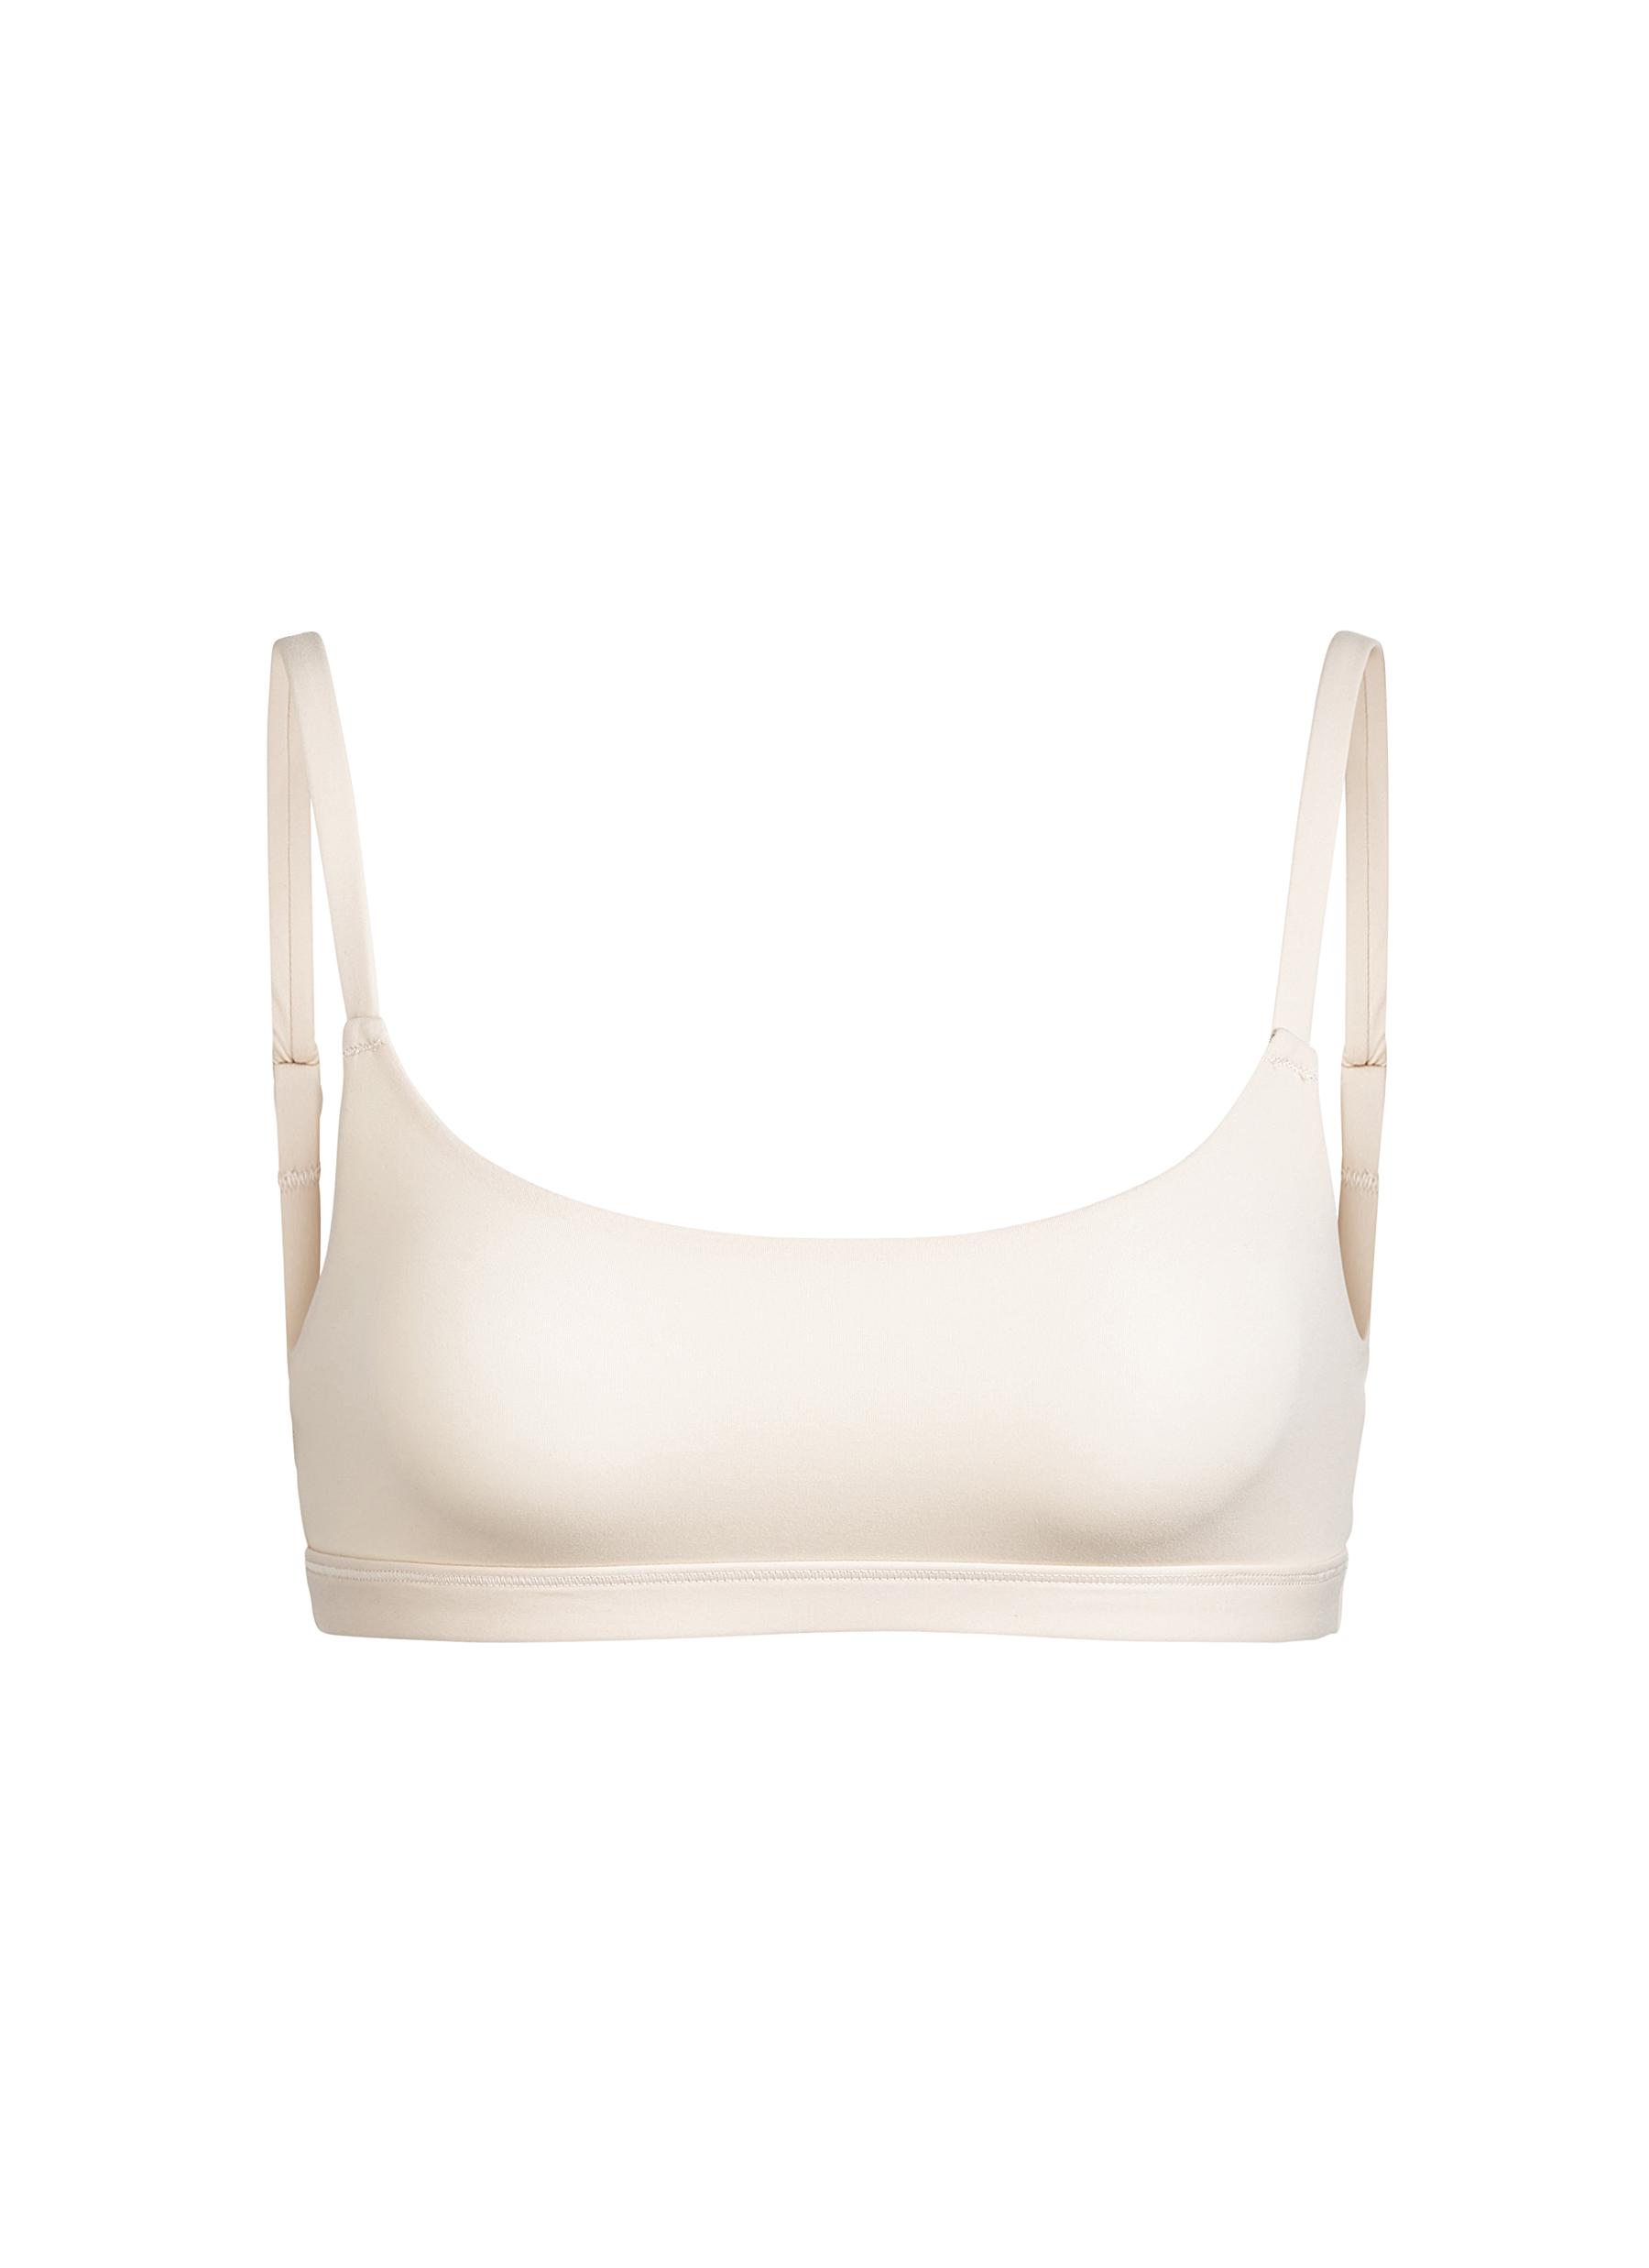 SKIMS Weightless Scoop Bra Size undefined - $27 New With Tags - From Hannah